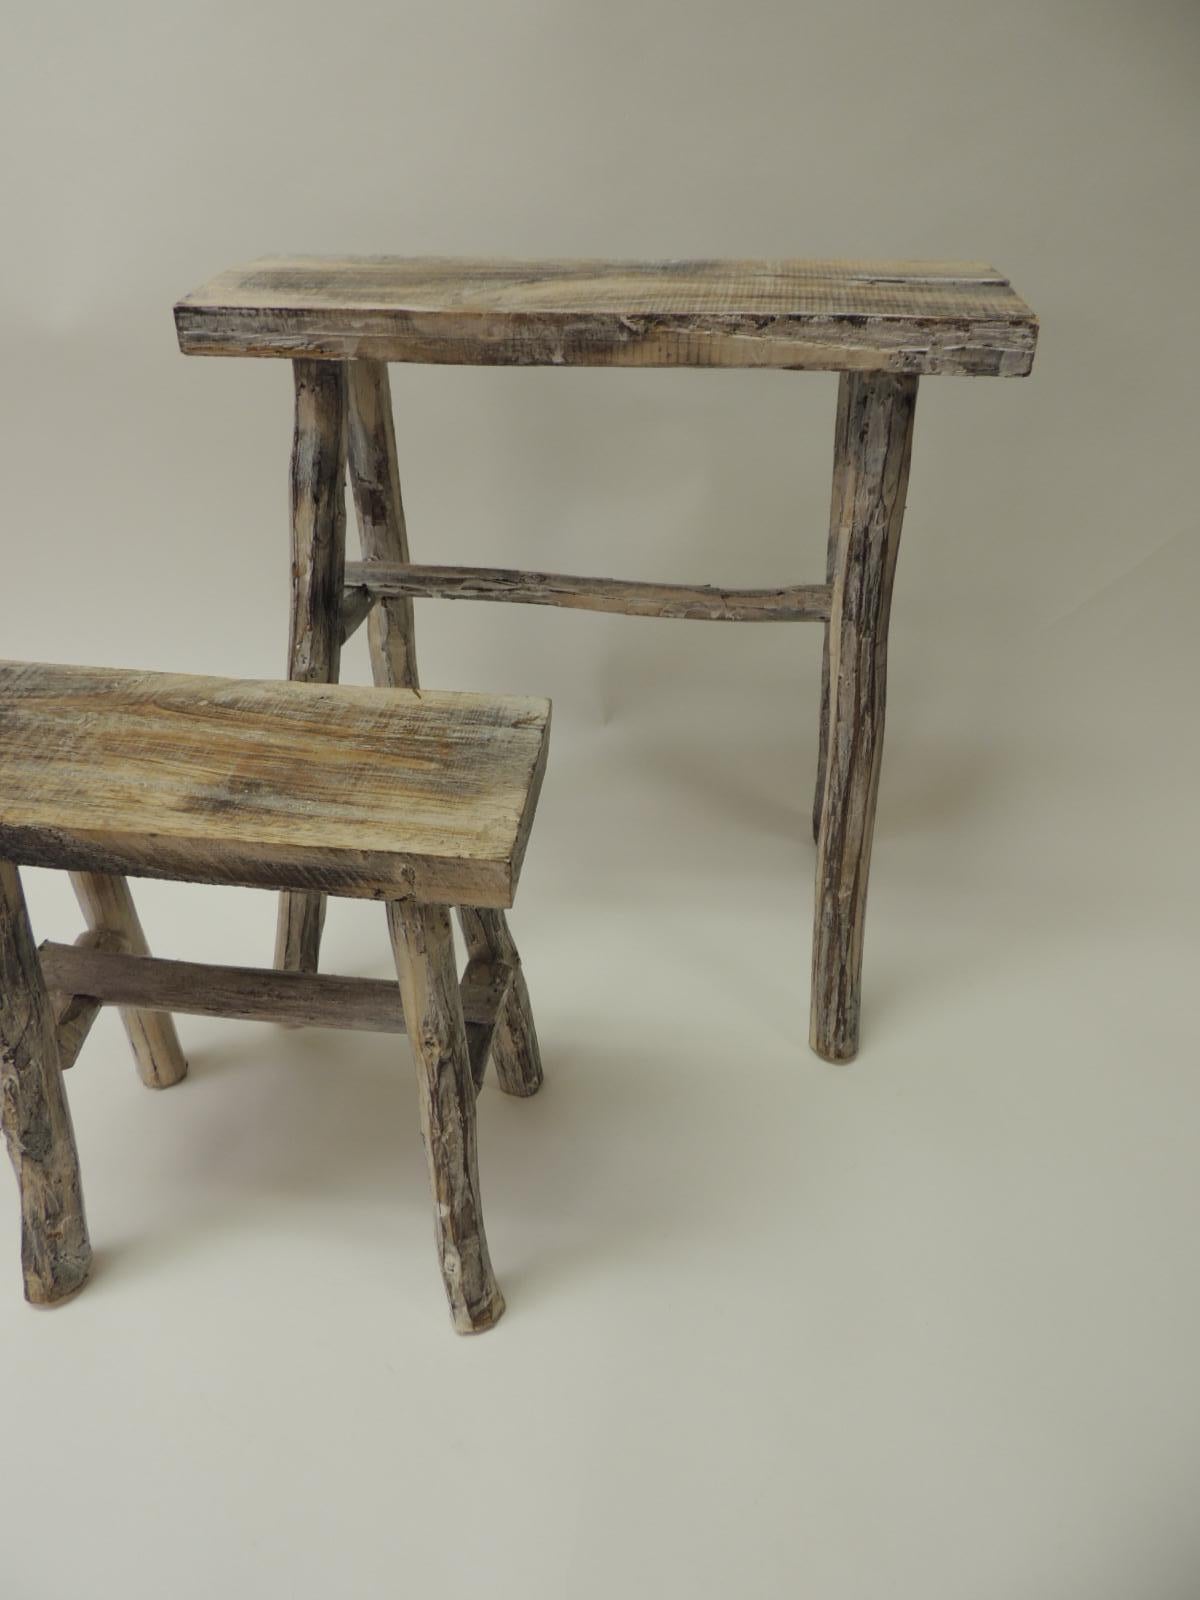 Rustic pair of vintage Asian white washed rubbed wood painted nesting artisanal side tables/stands.
Nice and sturdy side tables, stands, great for bathroom decor, candles, planters.
Measures: Tall: 15.5 x 10 x 17 H
Short: 11 x 6.5 x 11 H.